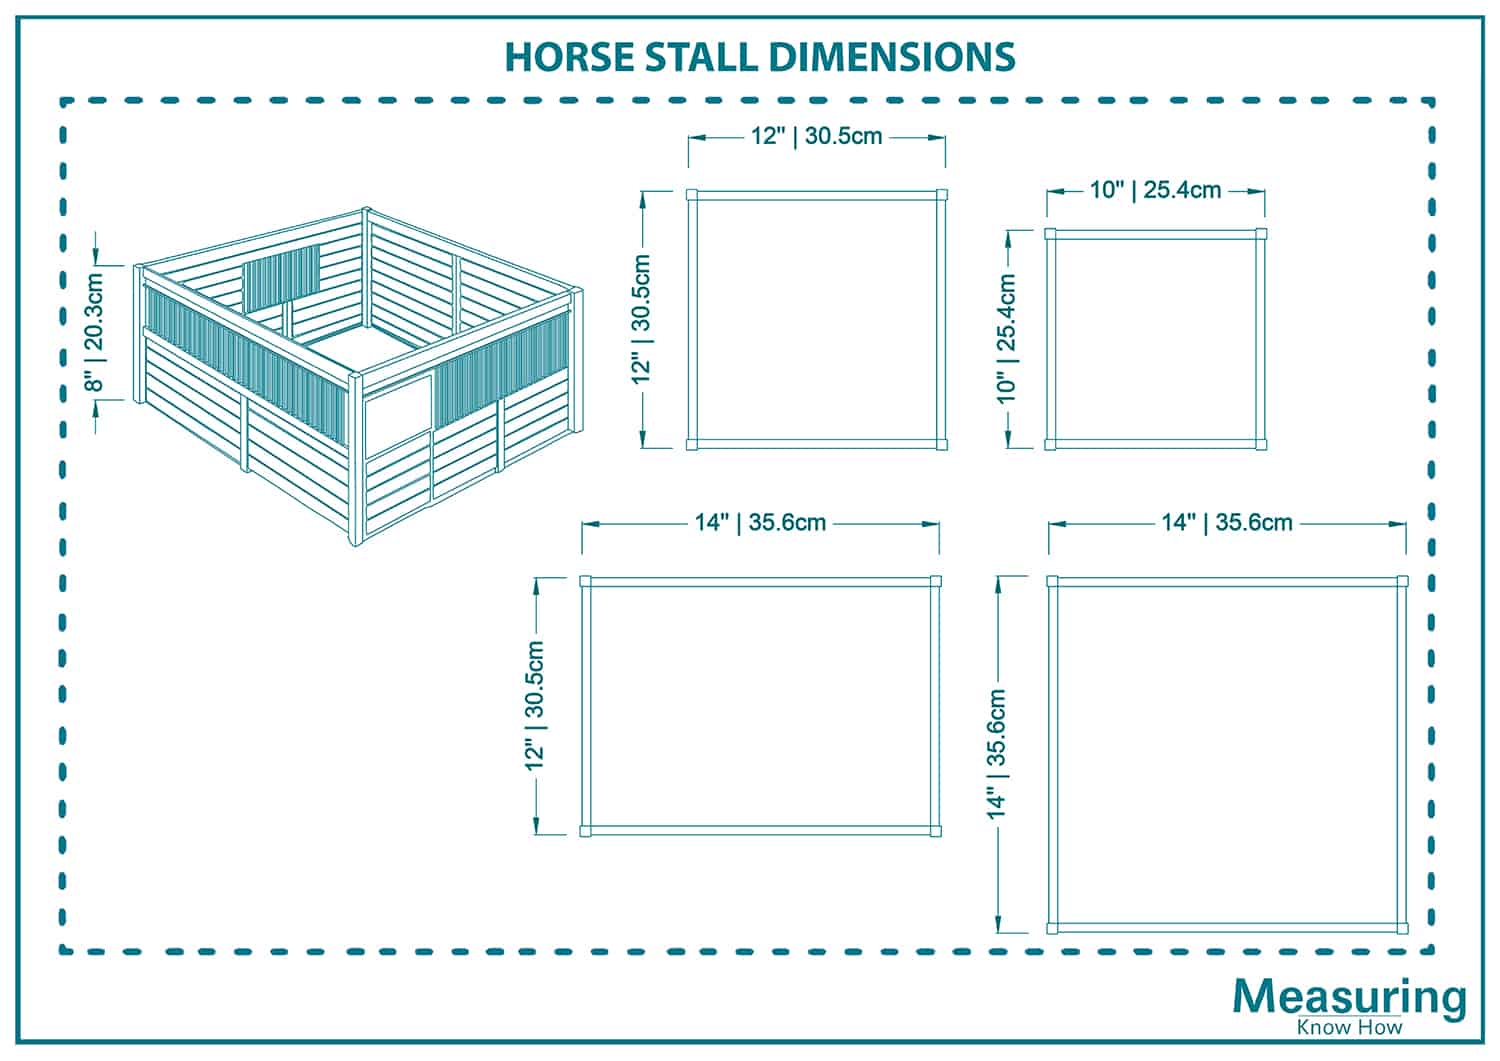 Horse stall dimensions